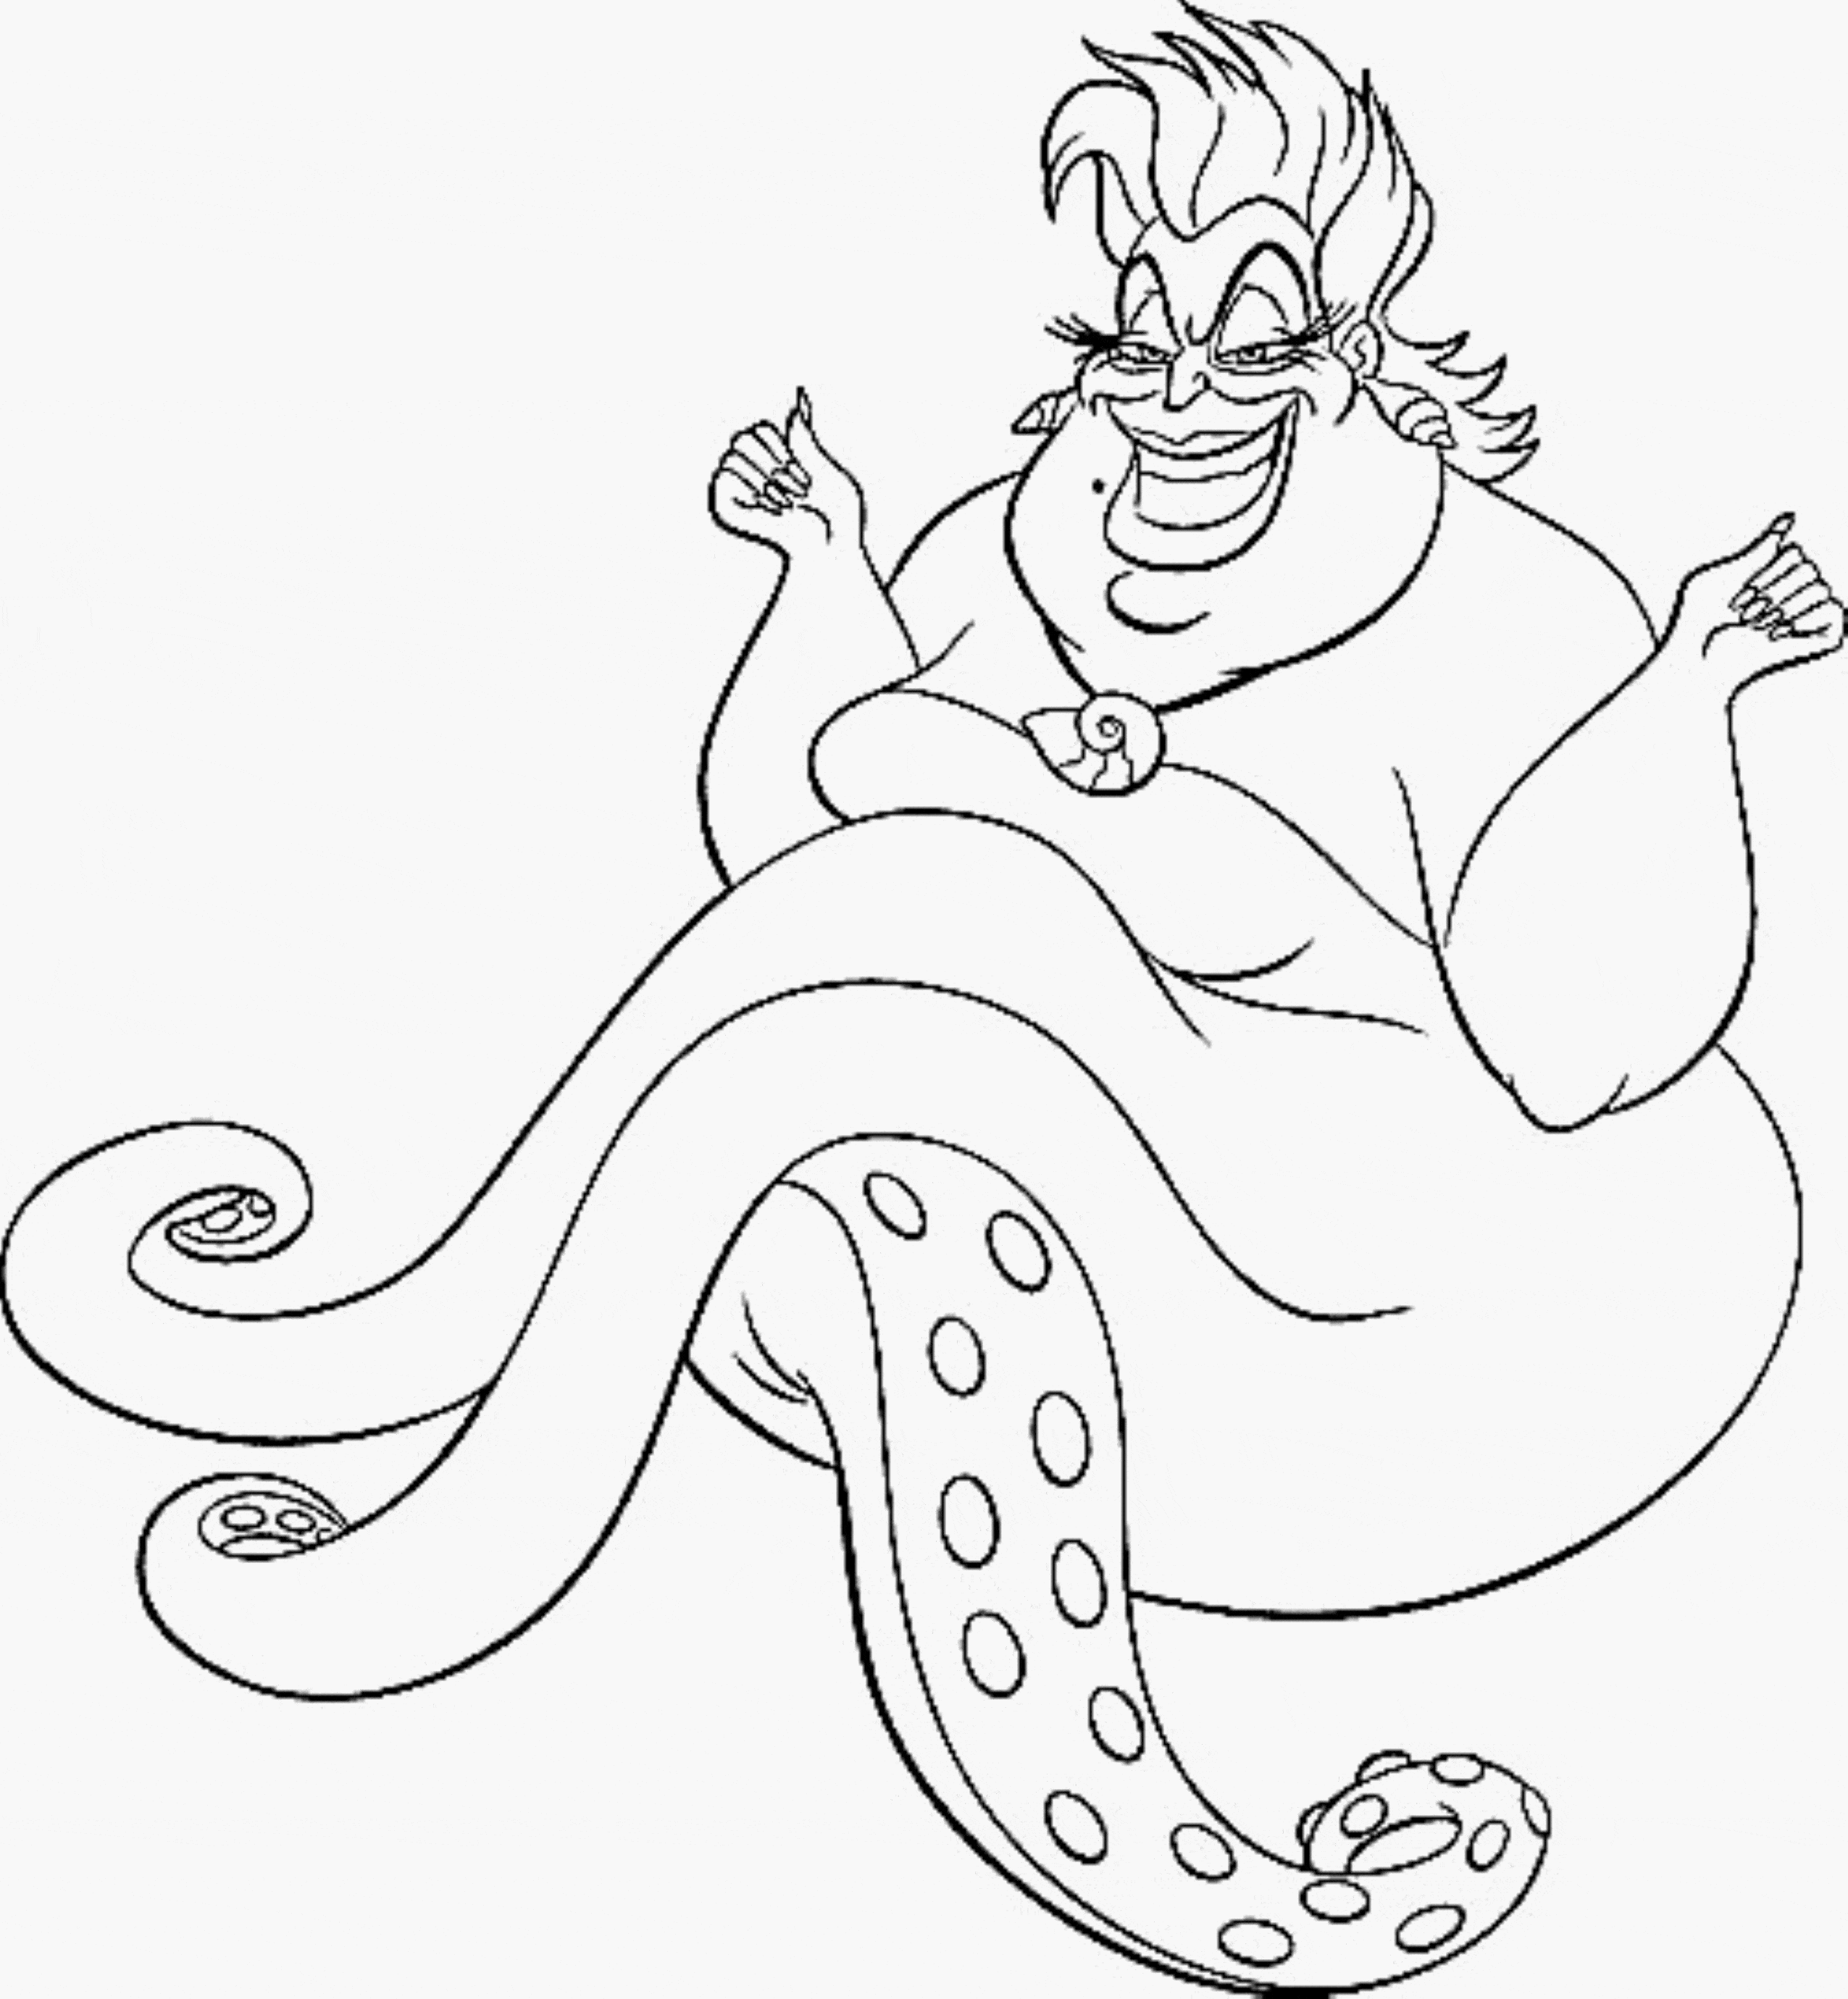 print-download-find-the-suitable-little-mermaid-coloring-pages-for